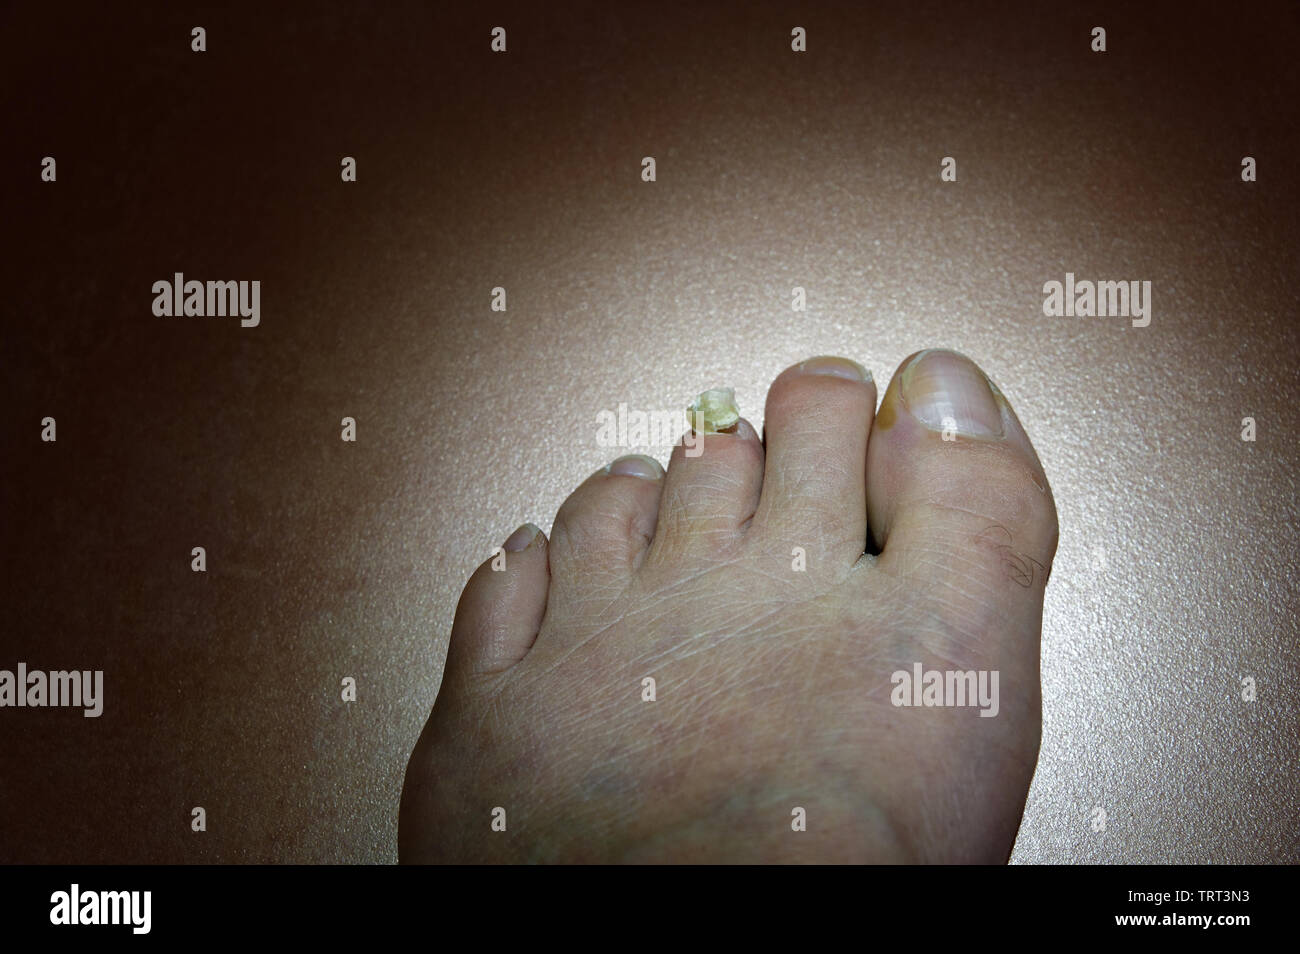 An unloved foot has a toe with a toenail ripped off Stock Photo